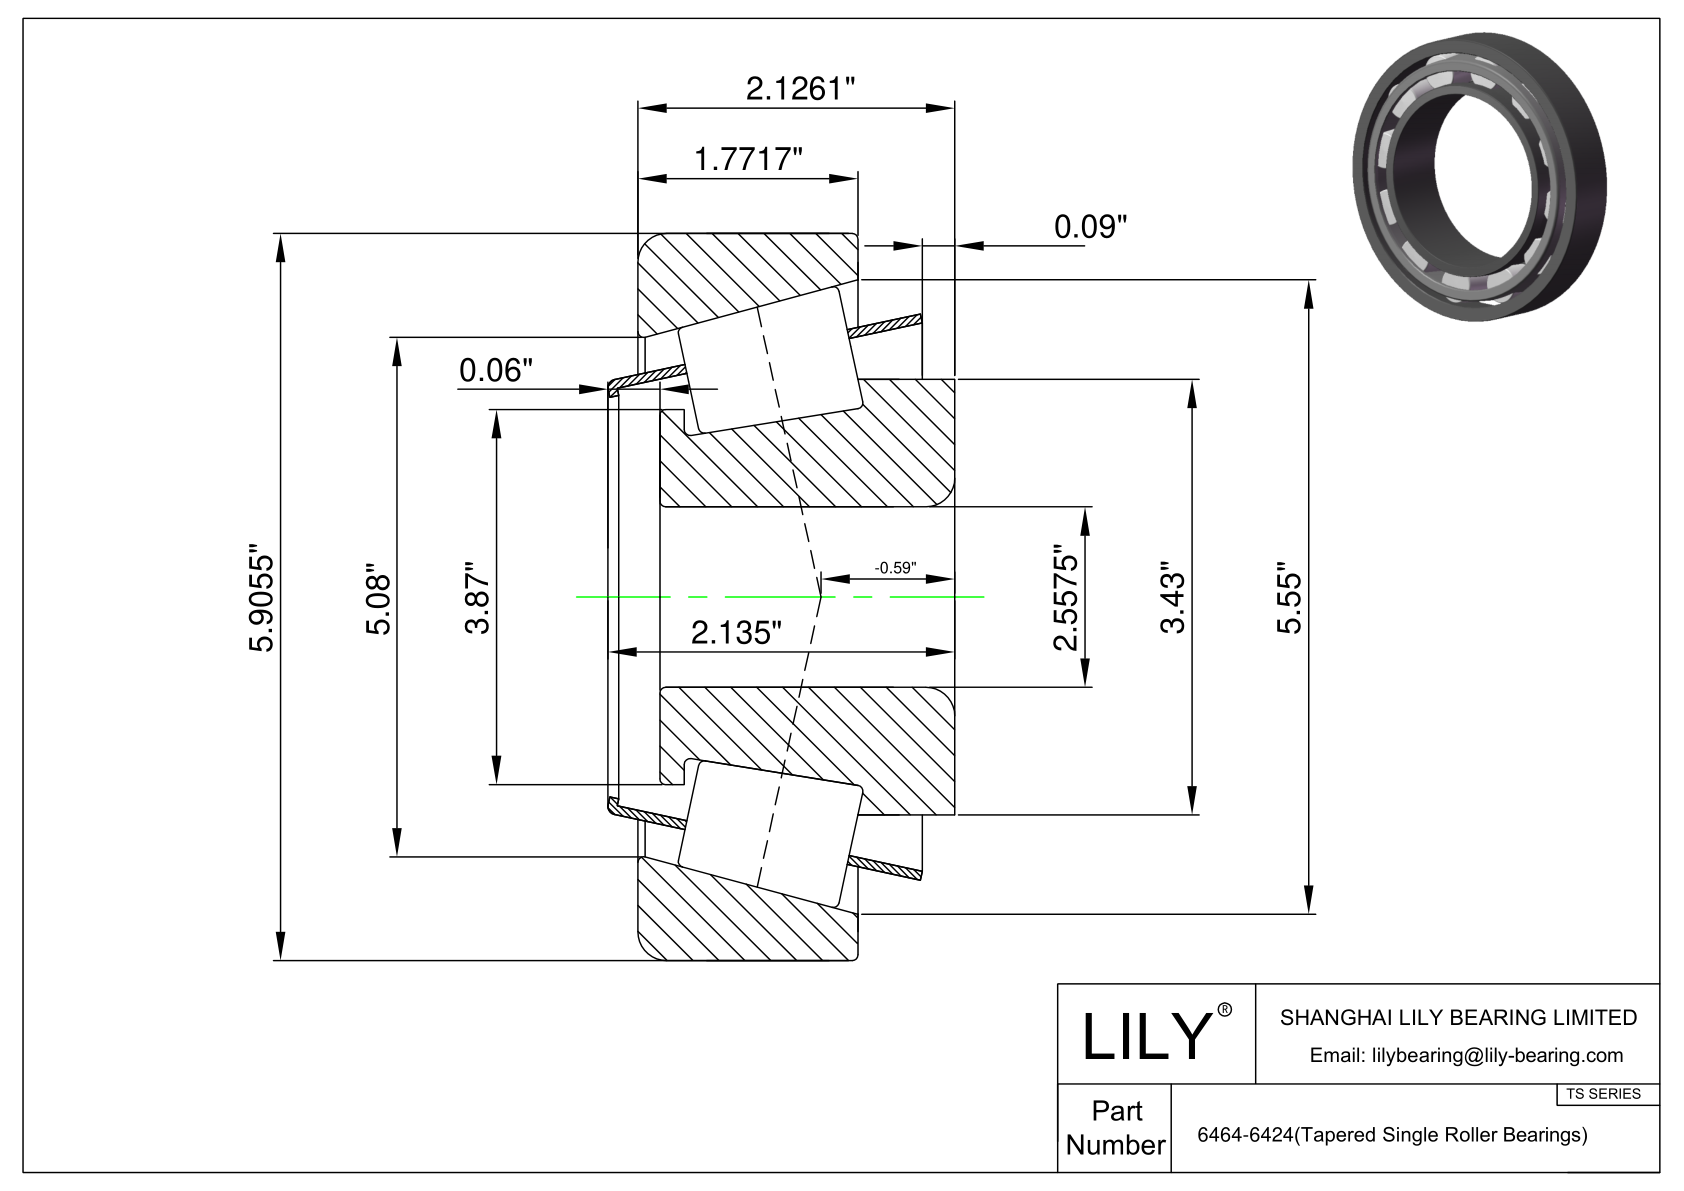 6464-6424 TS (Tapered Single Roller Bearings) (Imperial) cad drawing